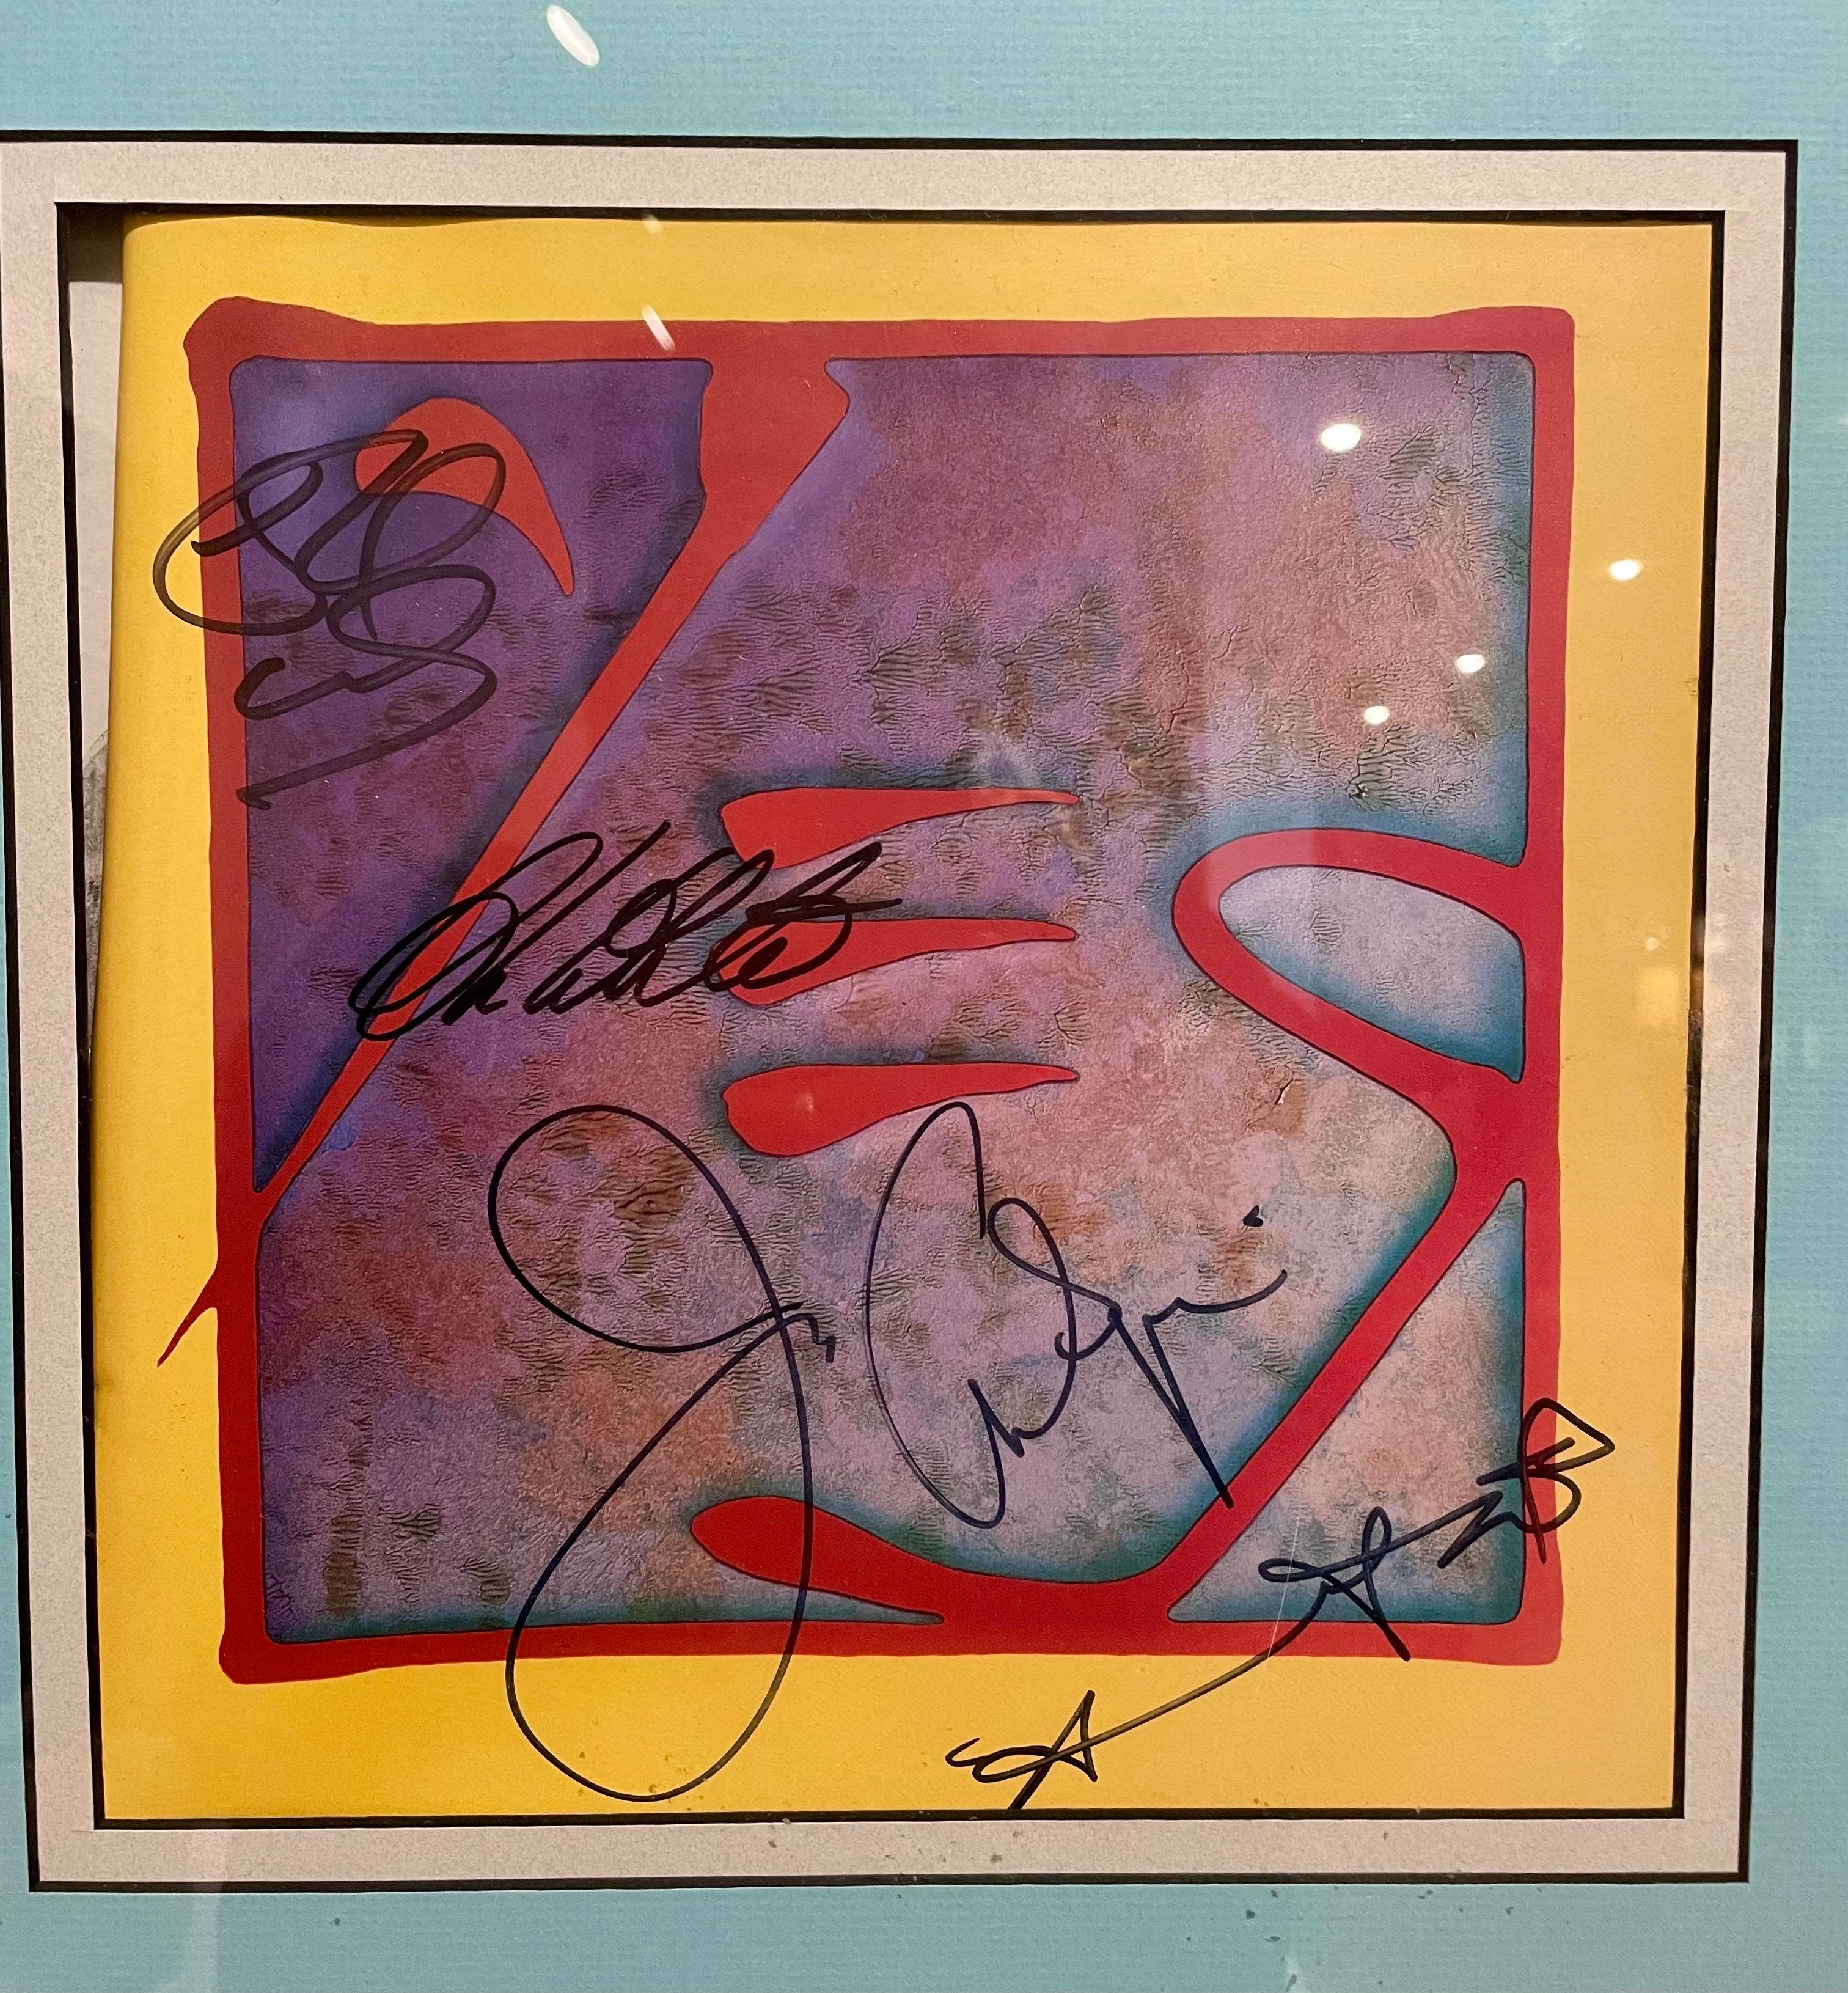 1978 yes yesyears signed by members of the band record and sleeve, original frame, signatures on front and back by Jon Anderson, Steve Howe, Chris Squire, Rick Wakeman, and Alan White. Original frame.